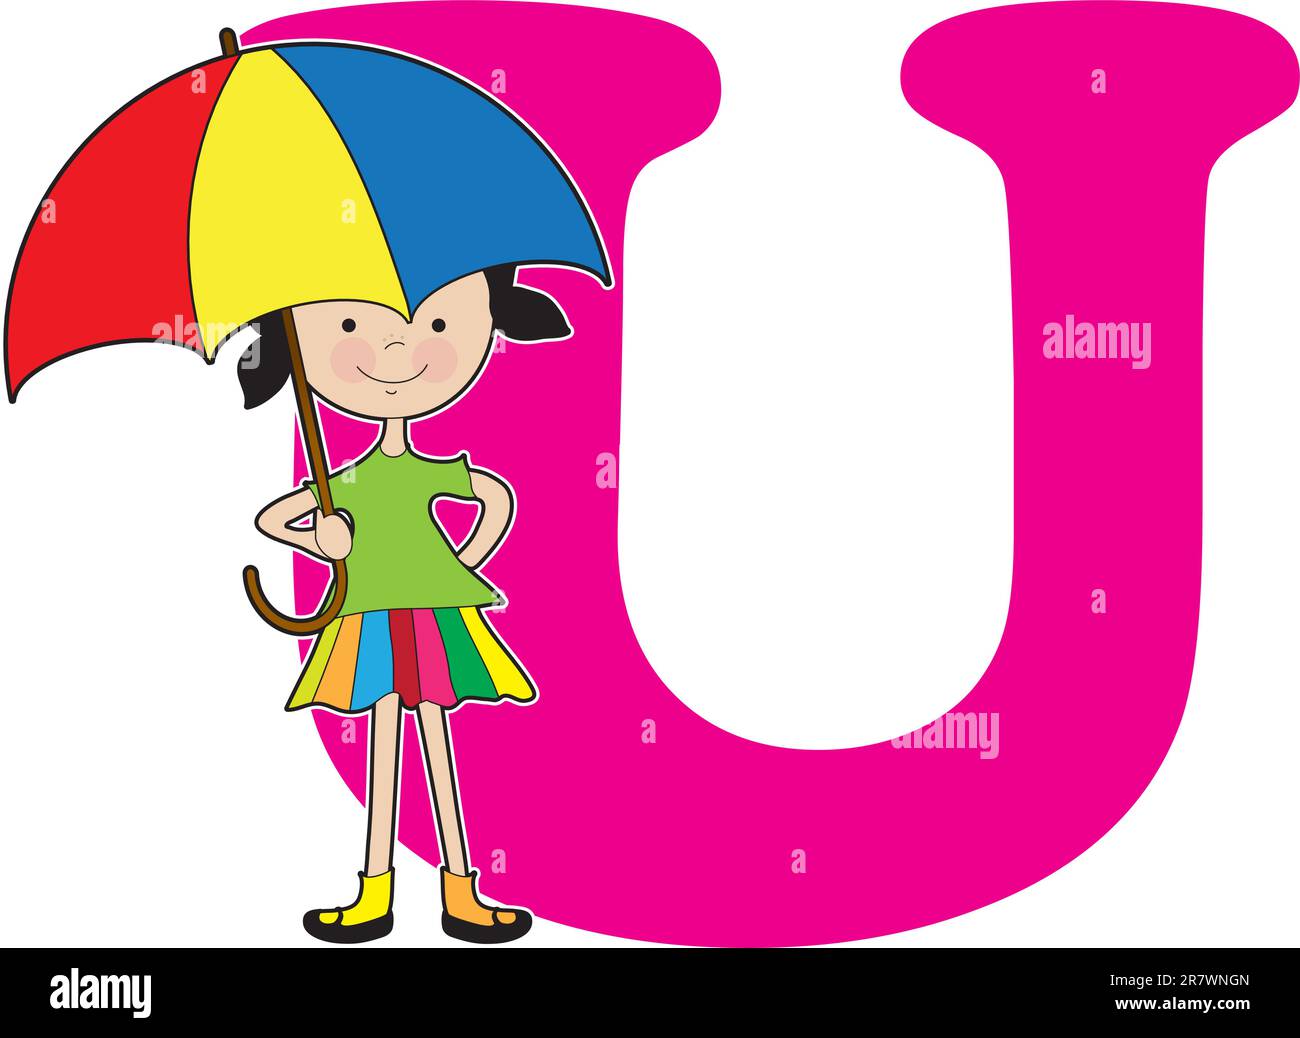 A young girl holding an umbrella to stand for the letter U Stock Vector